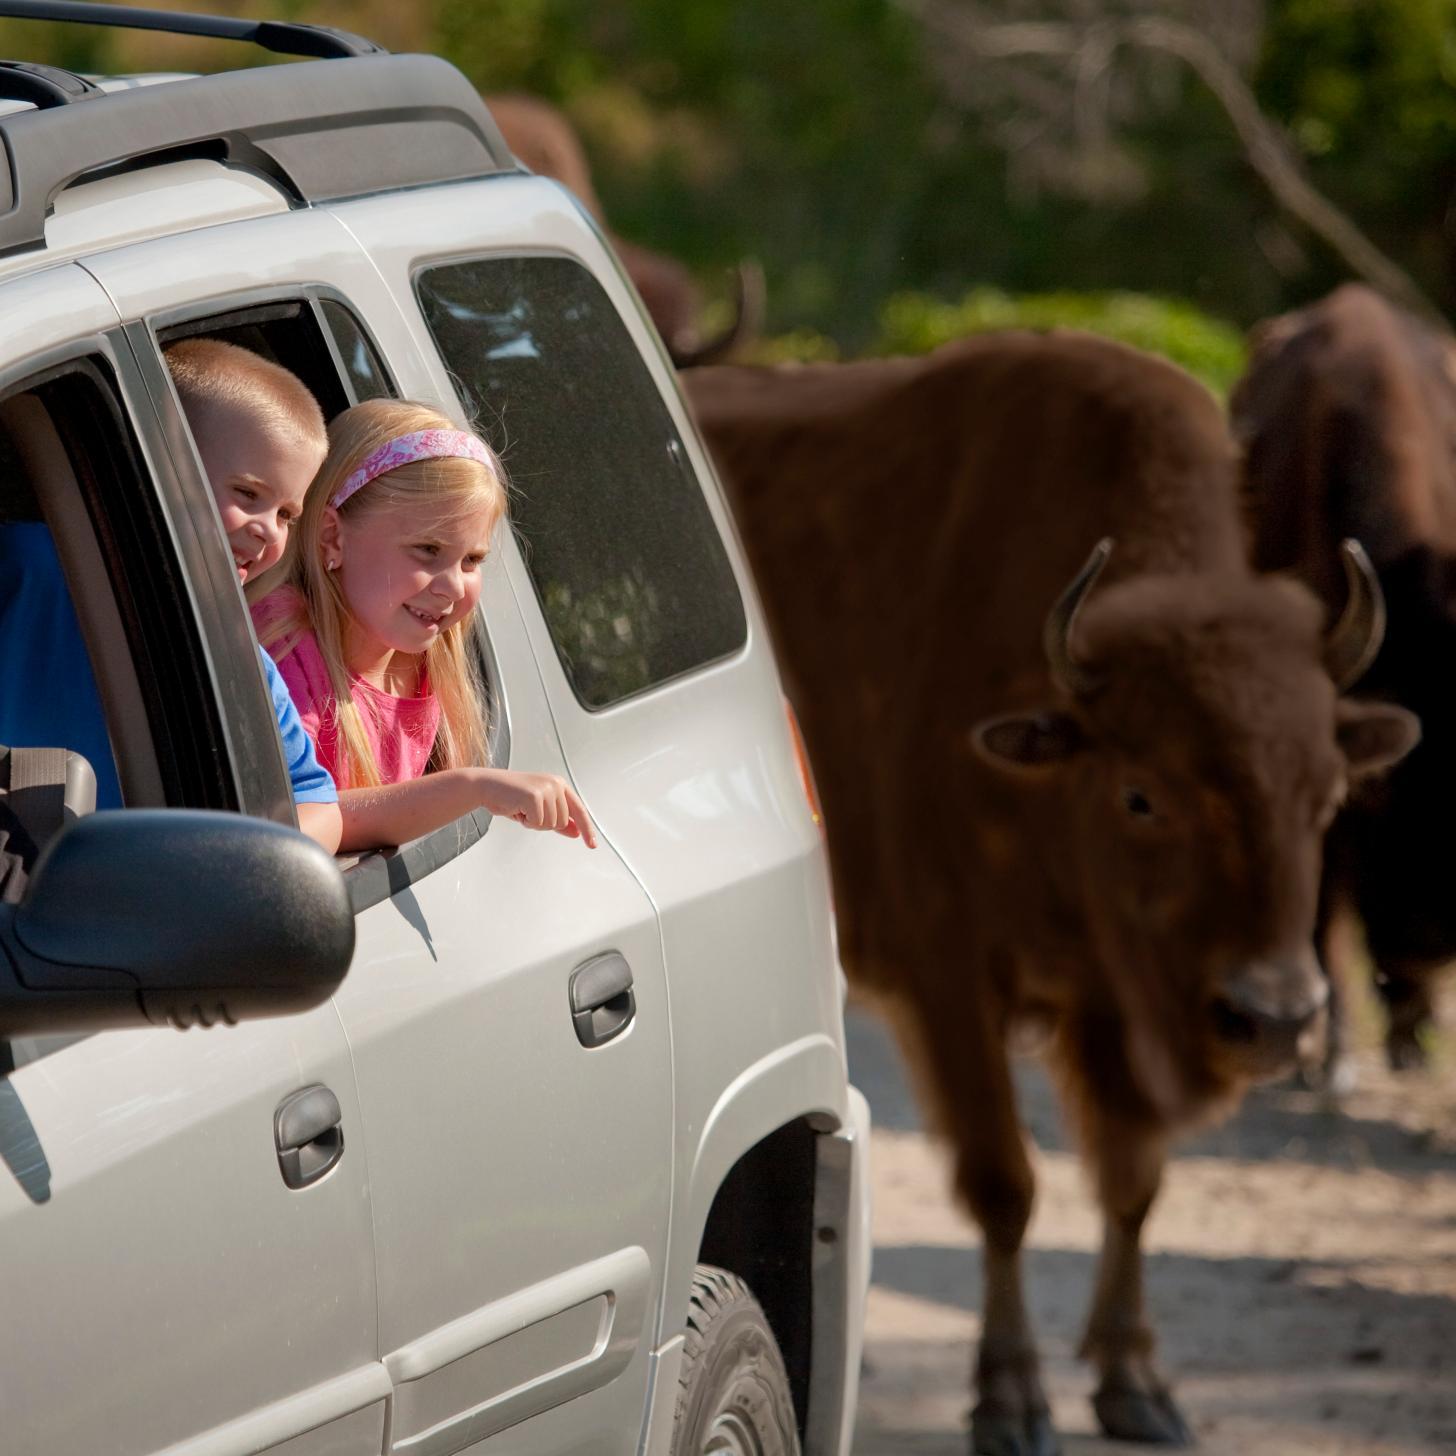 Lee G. Simmons Conservation Park & Wildlife Safari is a four-mile, drive-through North American wildlife adventure. Owned and operated by @OmahaZoo.